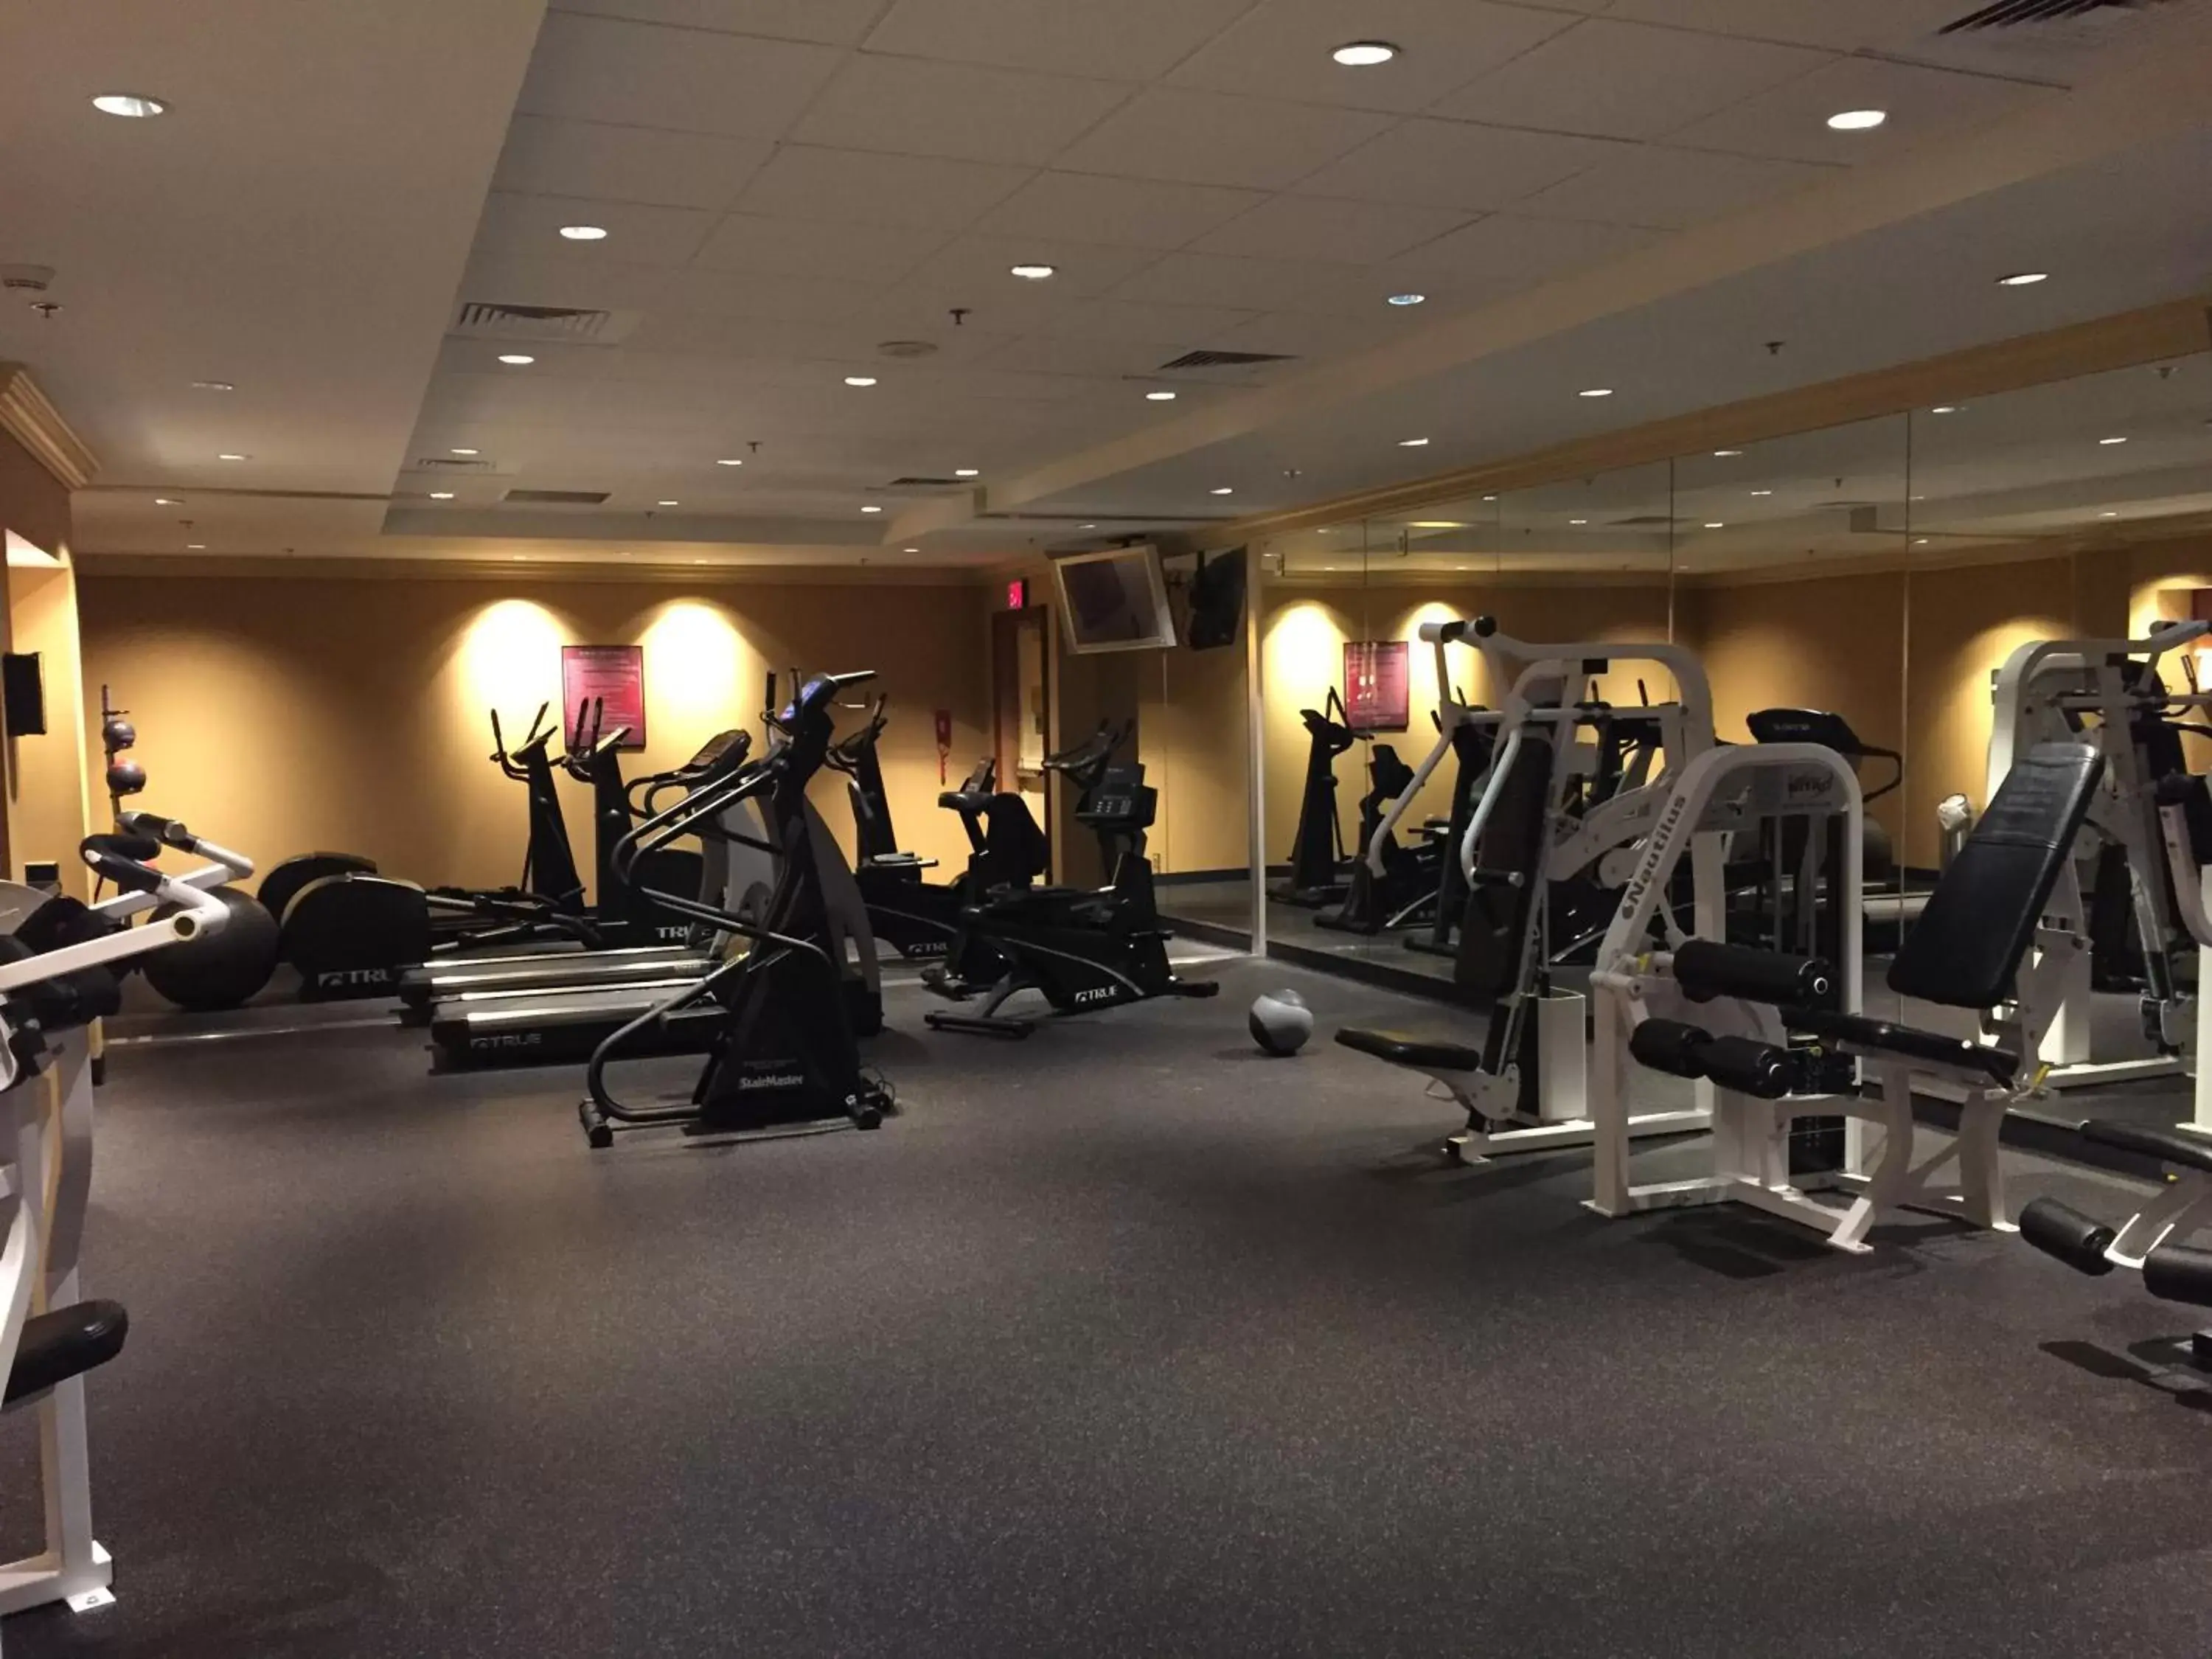 Fitness centre/facilities, Fitness Center/Facilities in Hollywood Casino St. Louis